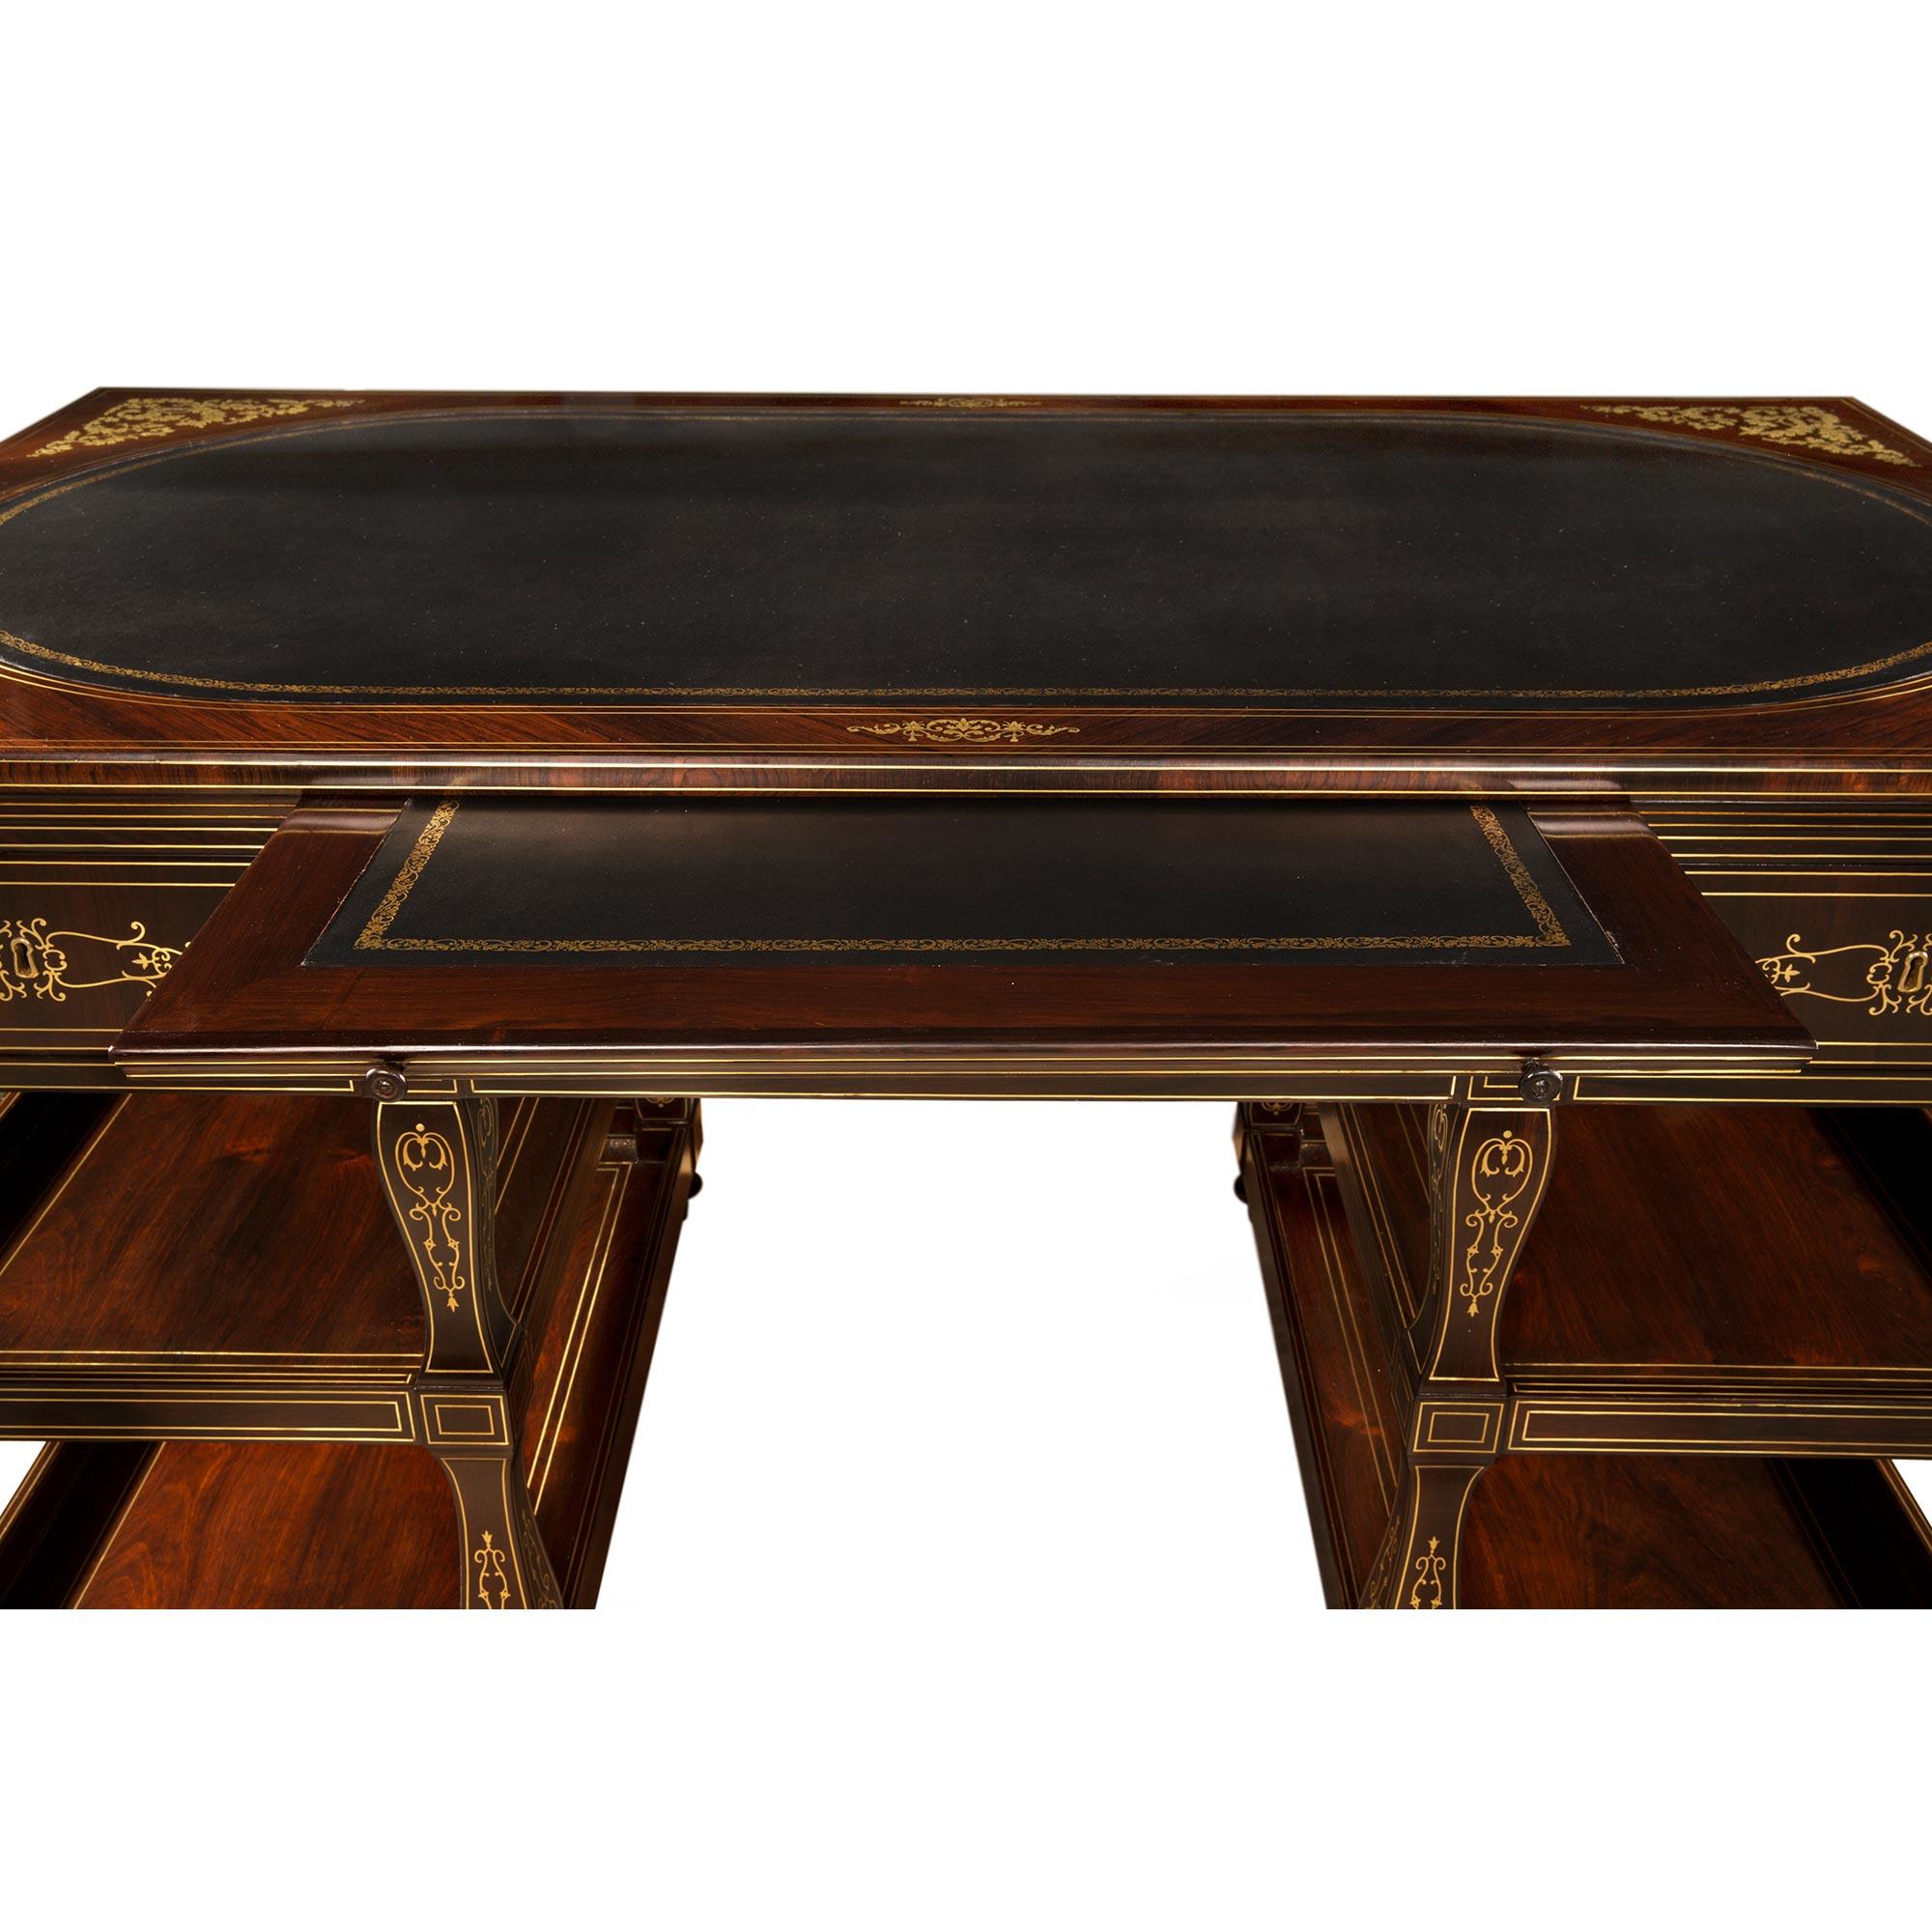 French 19th Century Charles X Period Rosewood and Brass Inlaid Desk For Sale 5